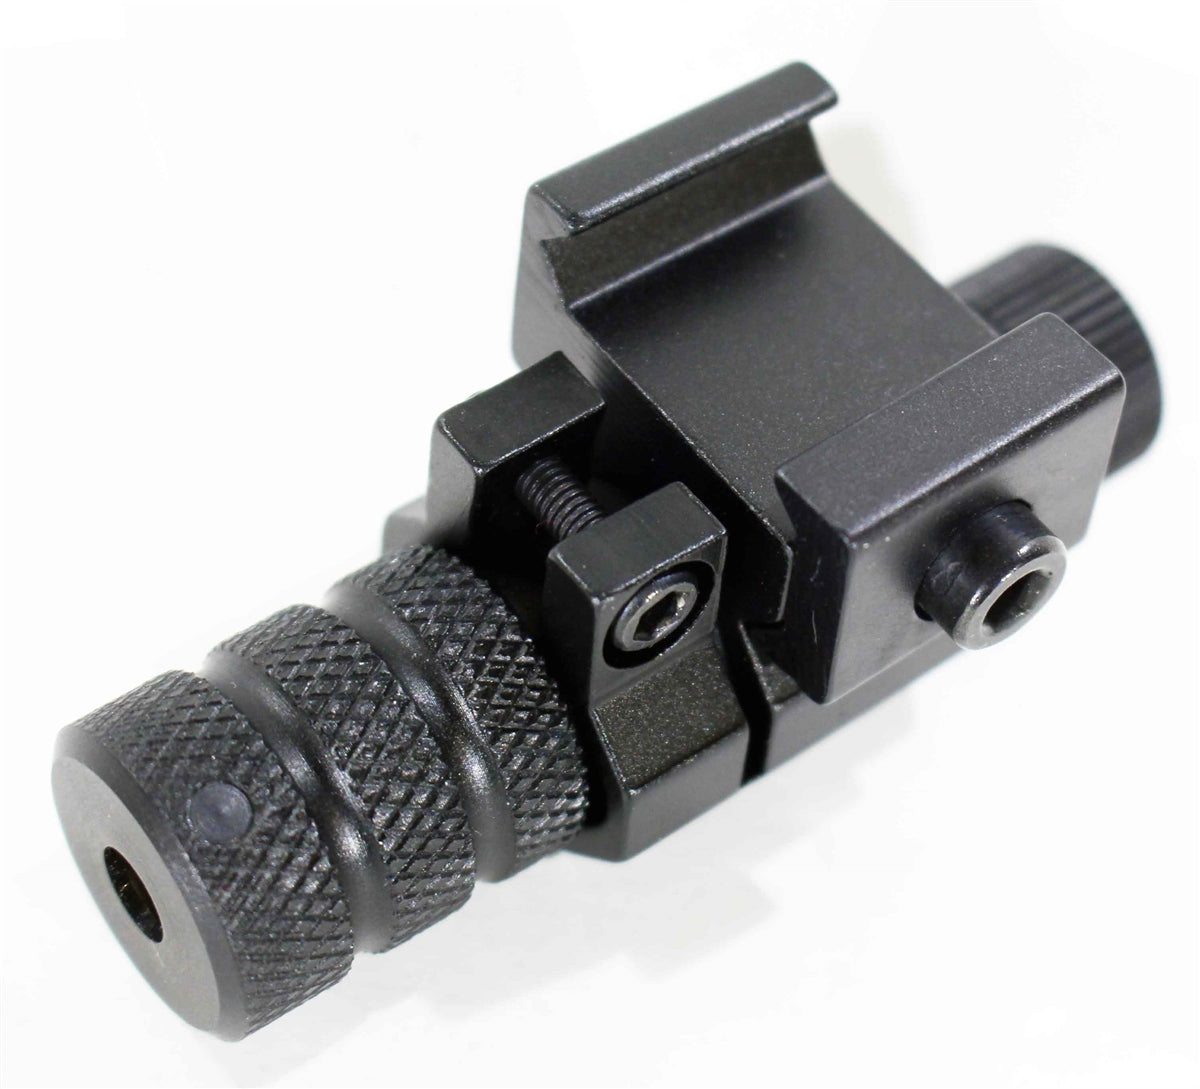 rifle picatinny mounted red laser sight.